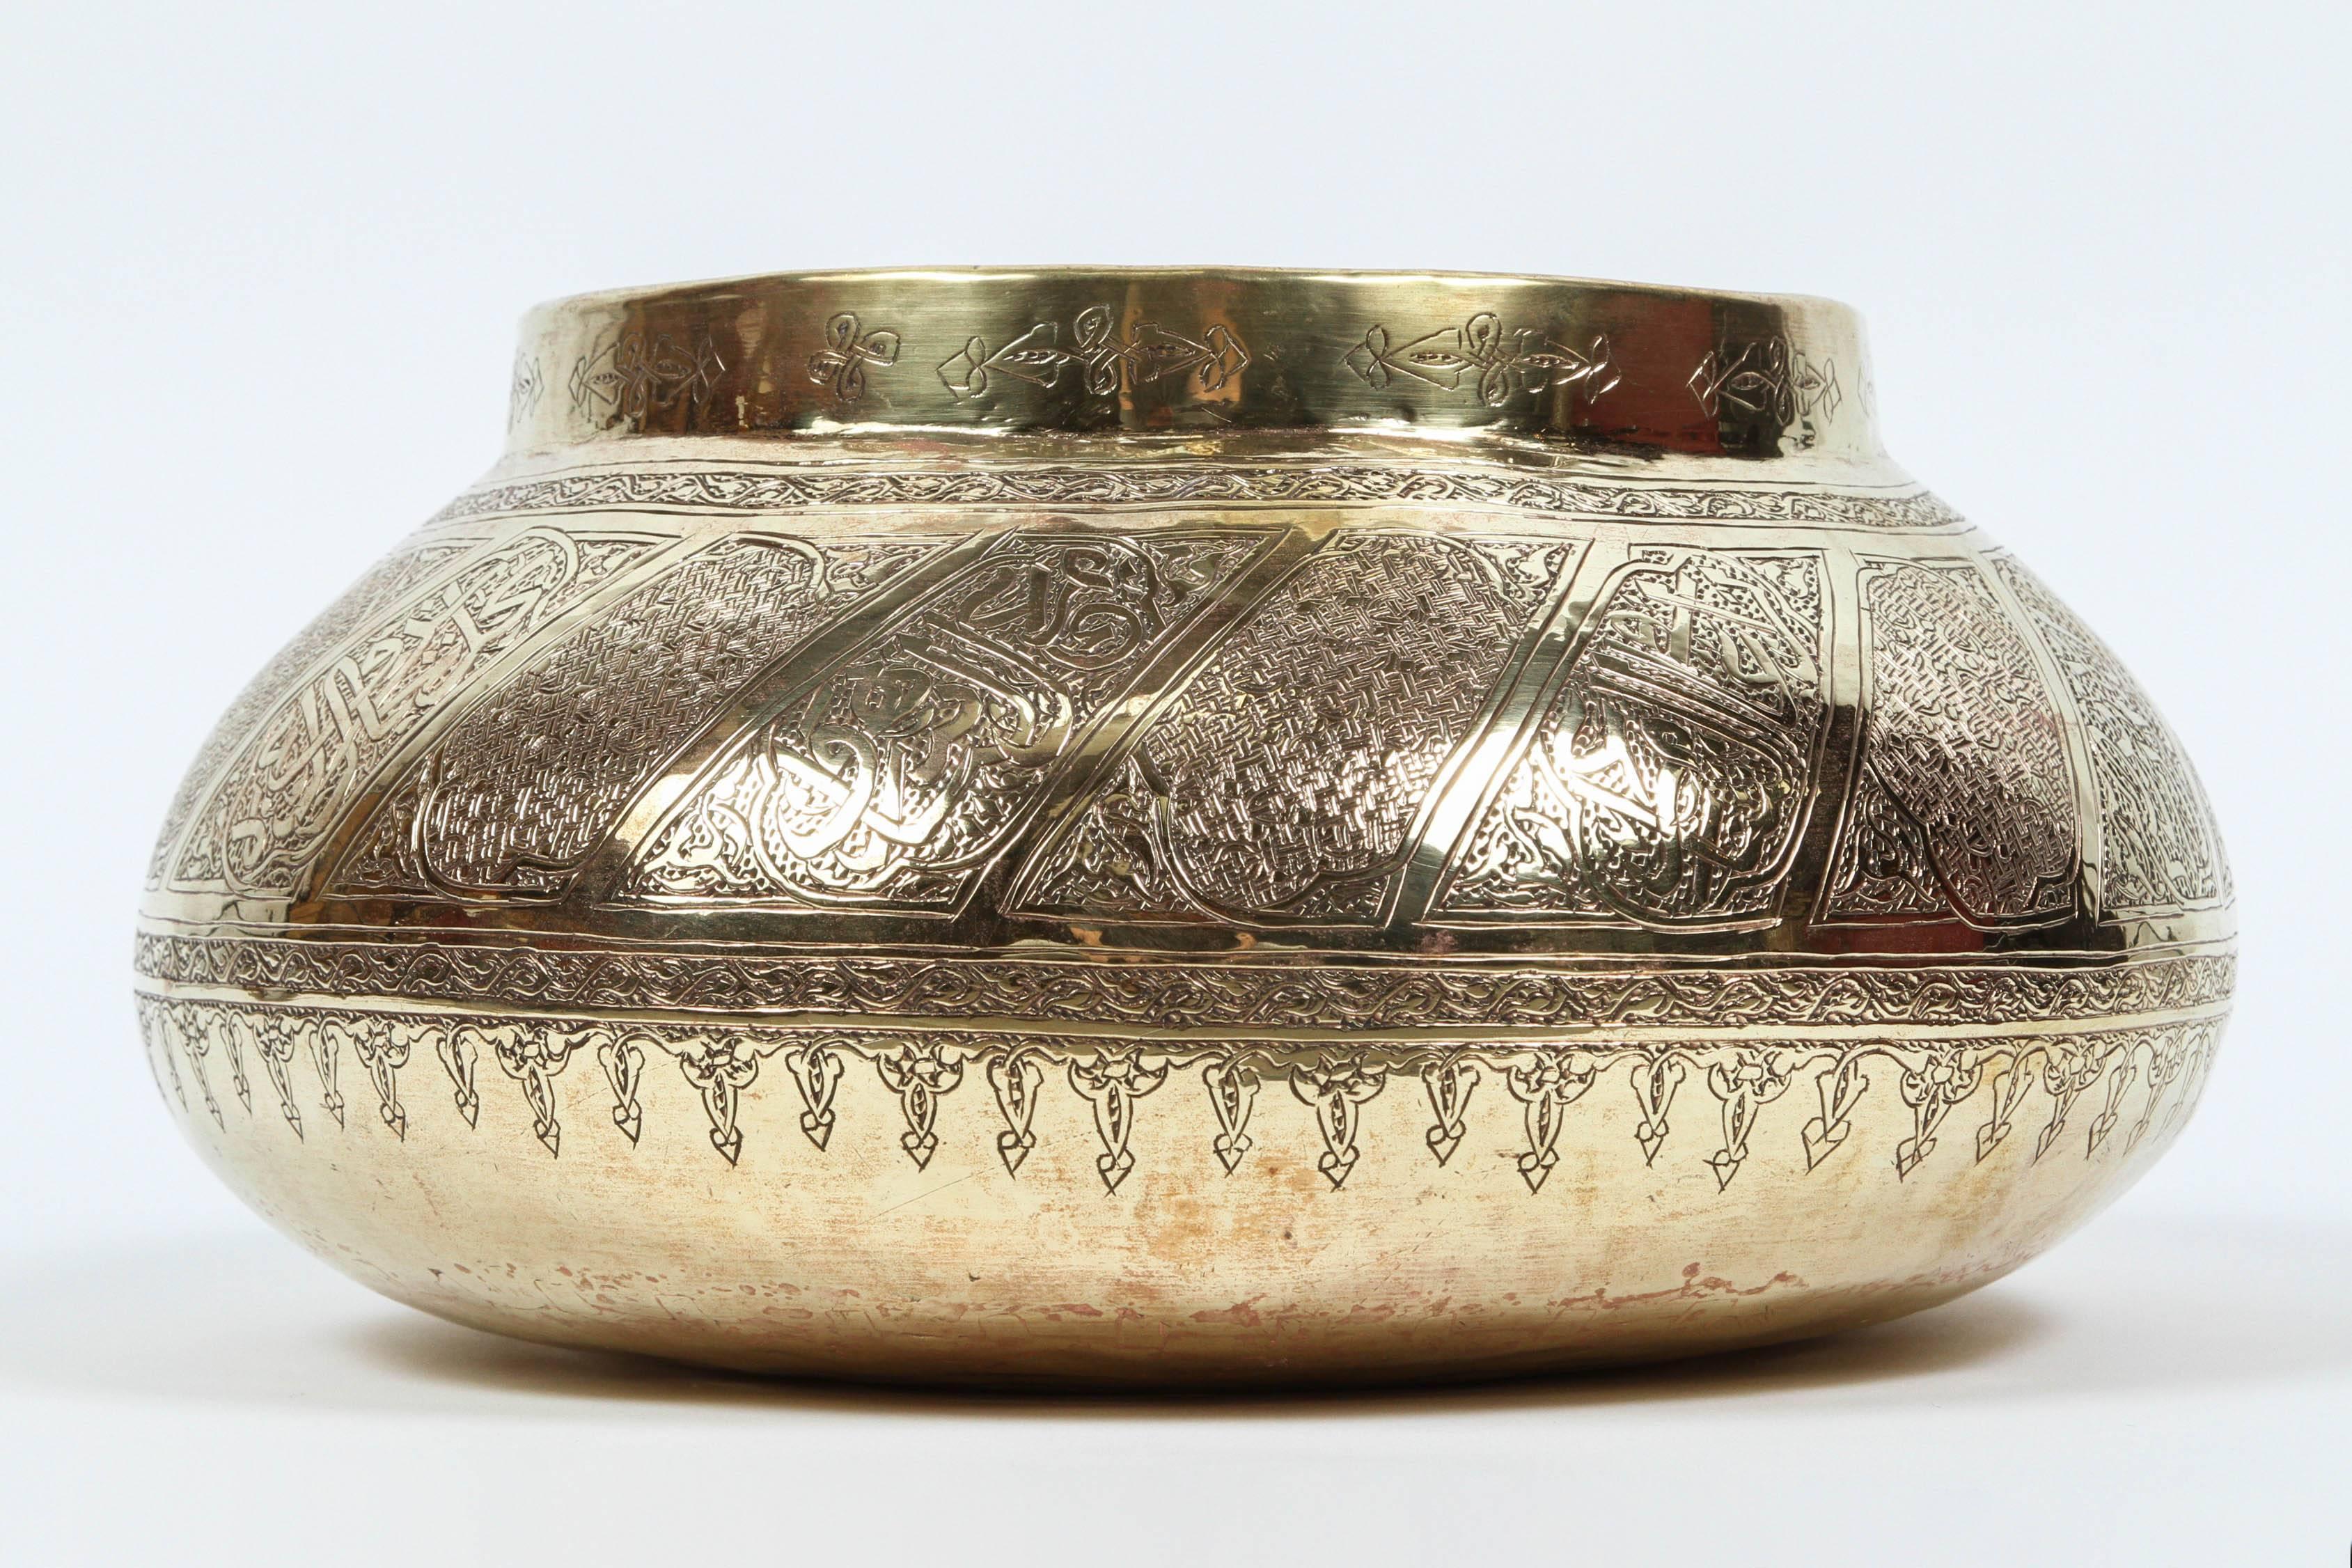 Moorish brass bowl engraved with Thuluth Arabic Script Calligraphy
Large antique Indo-Persian style brass bowl engraved with Thuluth callighraphy.
Profusely chased with vines and vegetal motifs and inscribed with Arabic script.
This Middle